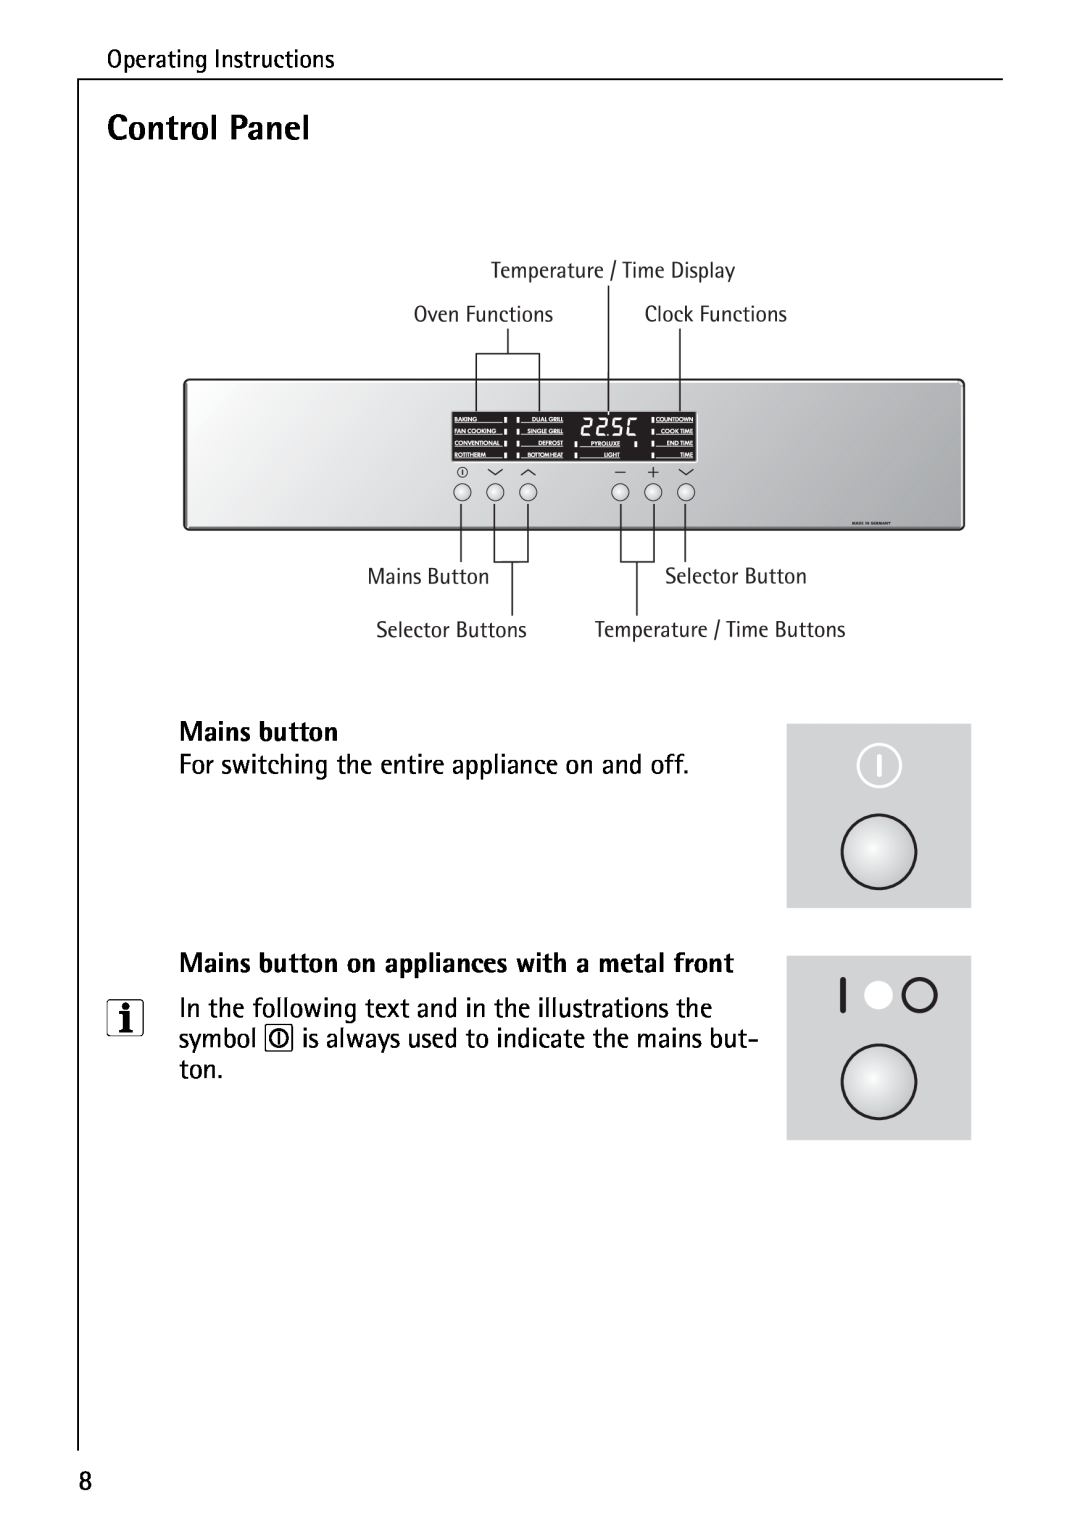 Electrolux B6140-1 manual Control Panel, Operating Instructions, Mains button on appliances with a metal front 